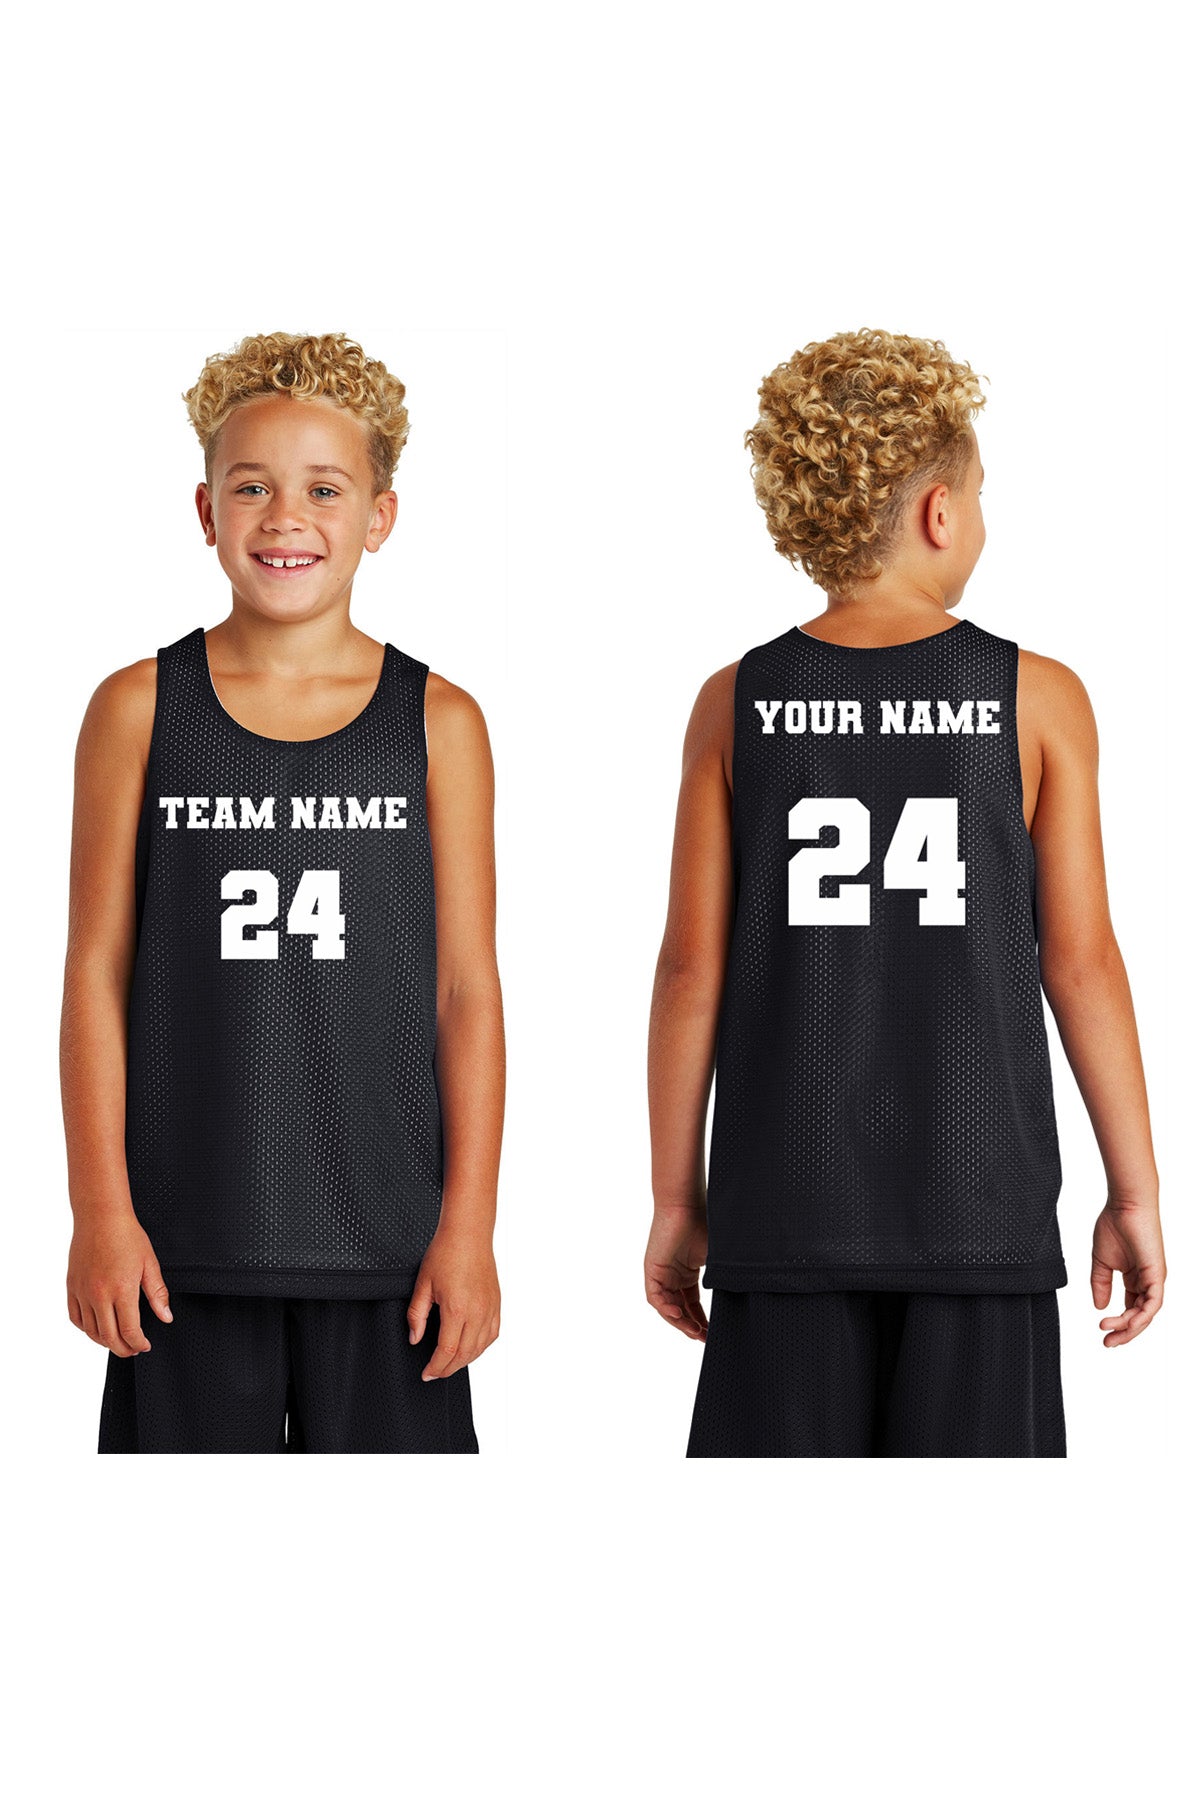 Personalize Your Own Team Basketball Jersey with Your Custom Name